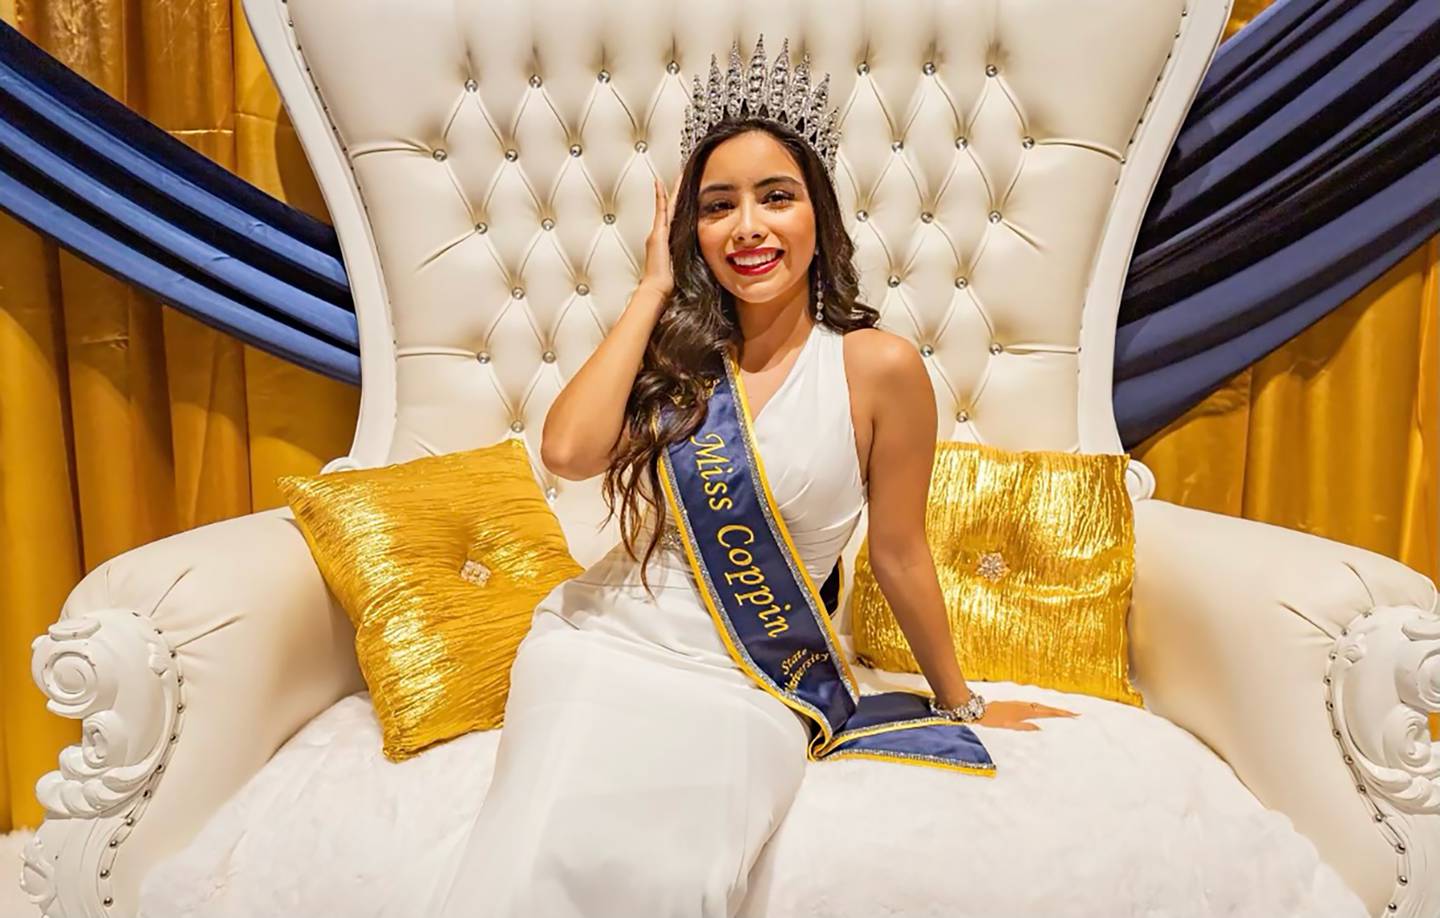 Keylin Perez, Miss Coppin State University. The 22-year-old is the first Latina to hold the crown in the school’s history.